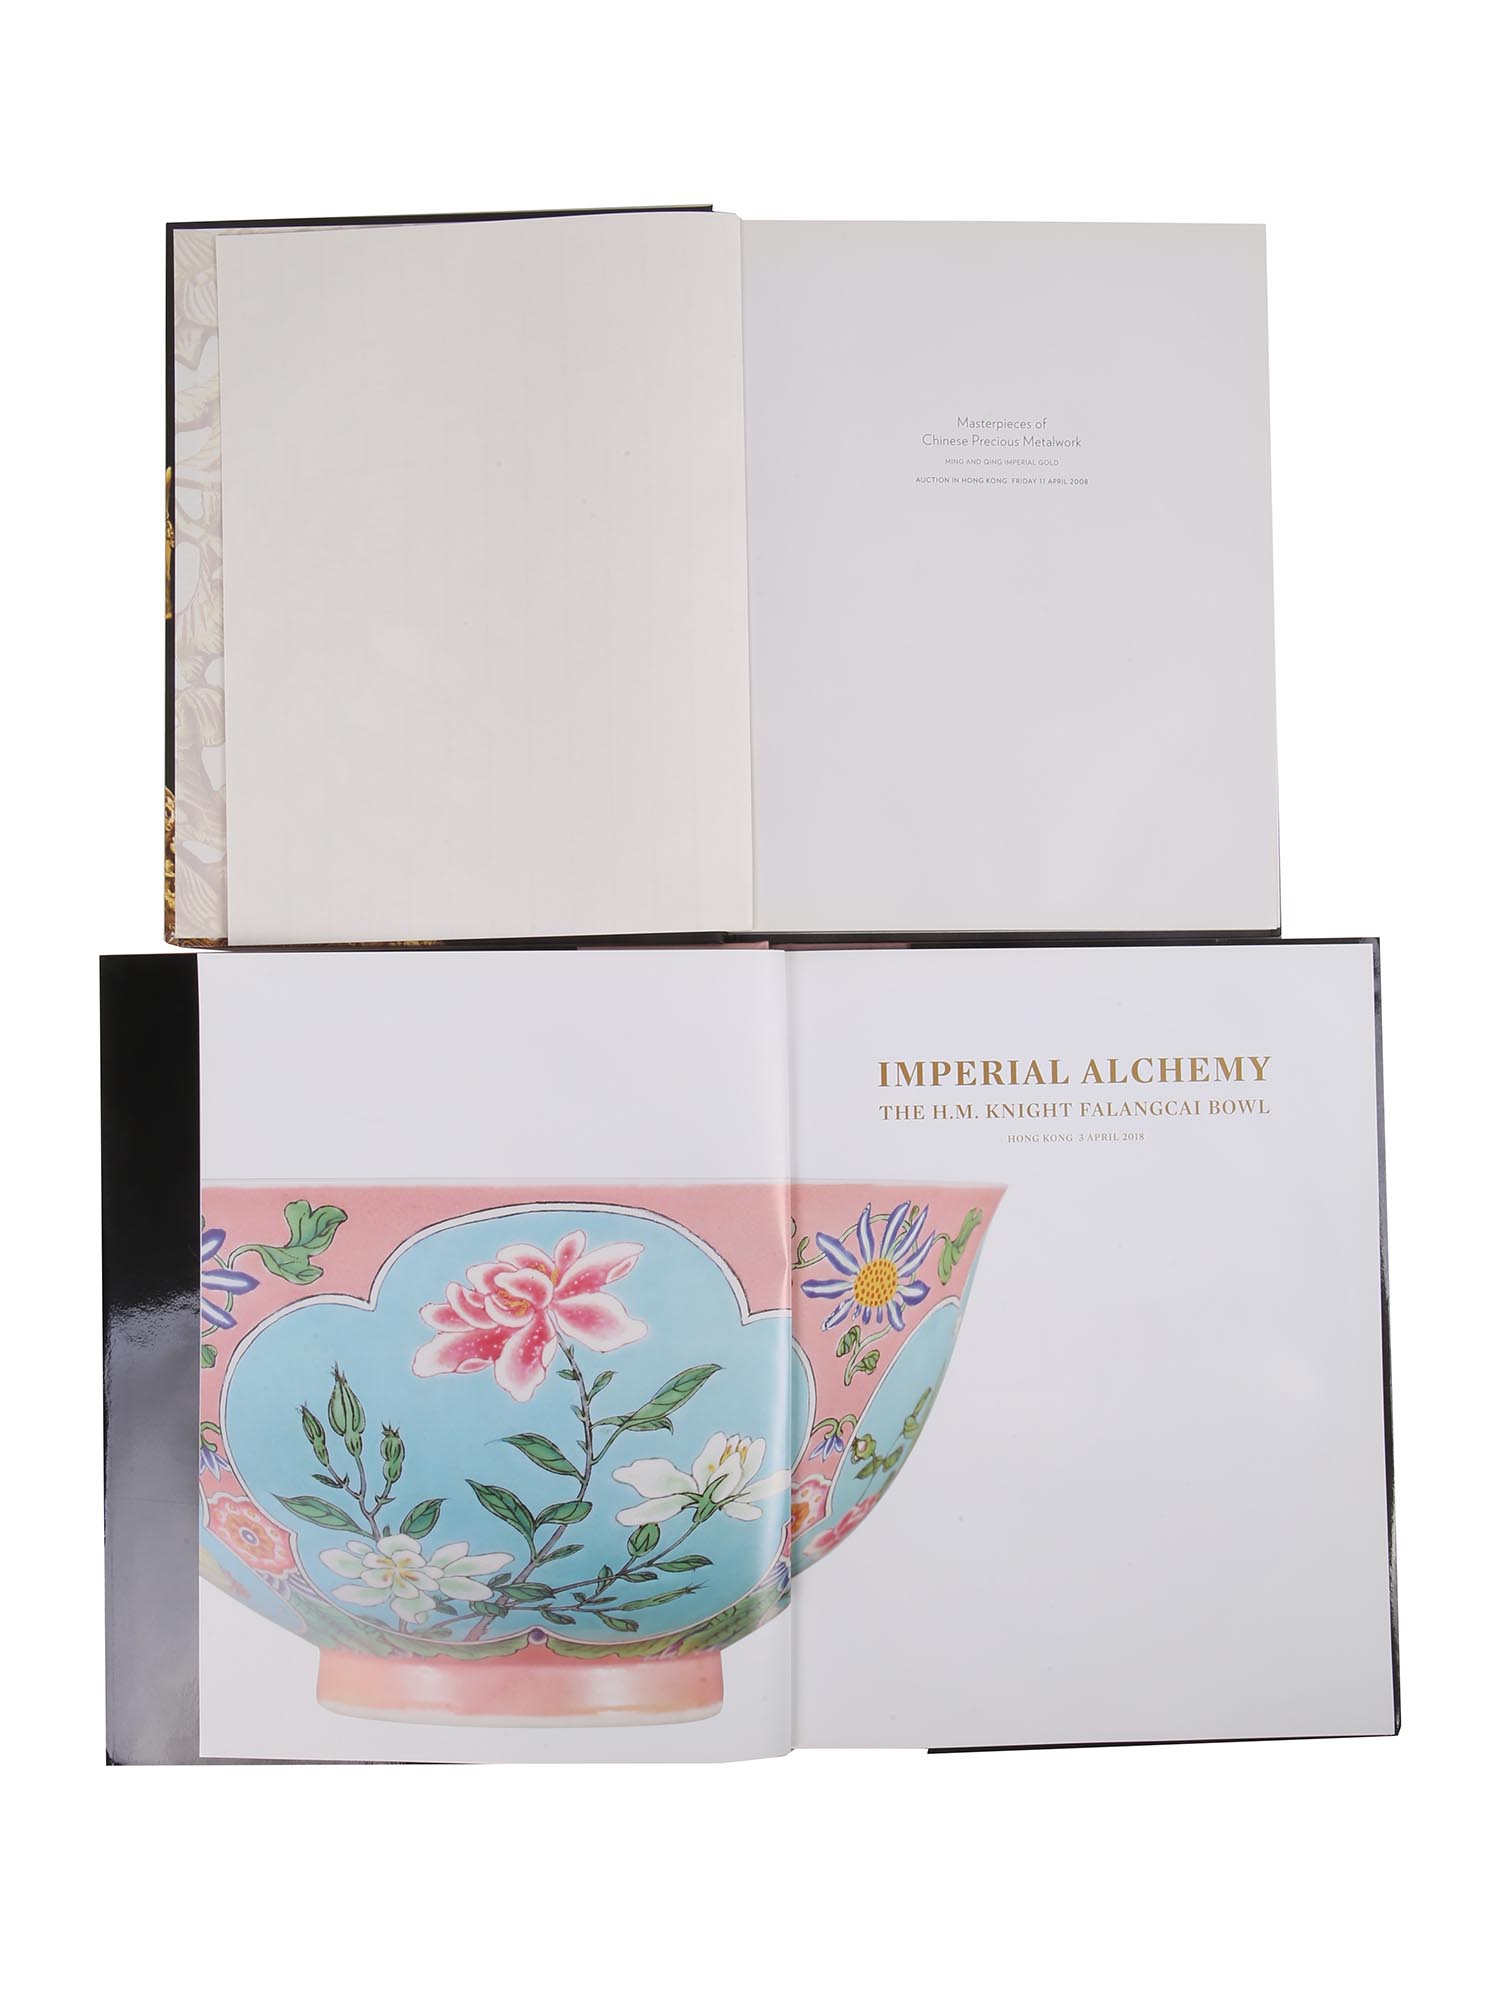 SOTHEBYS CHINESE PORCELAIN ART BOOKS CATALOGUES PIC-3